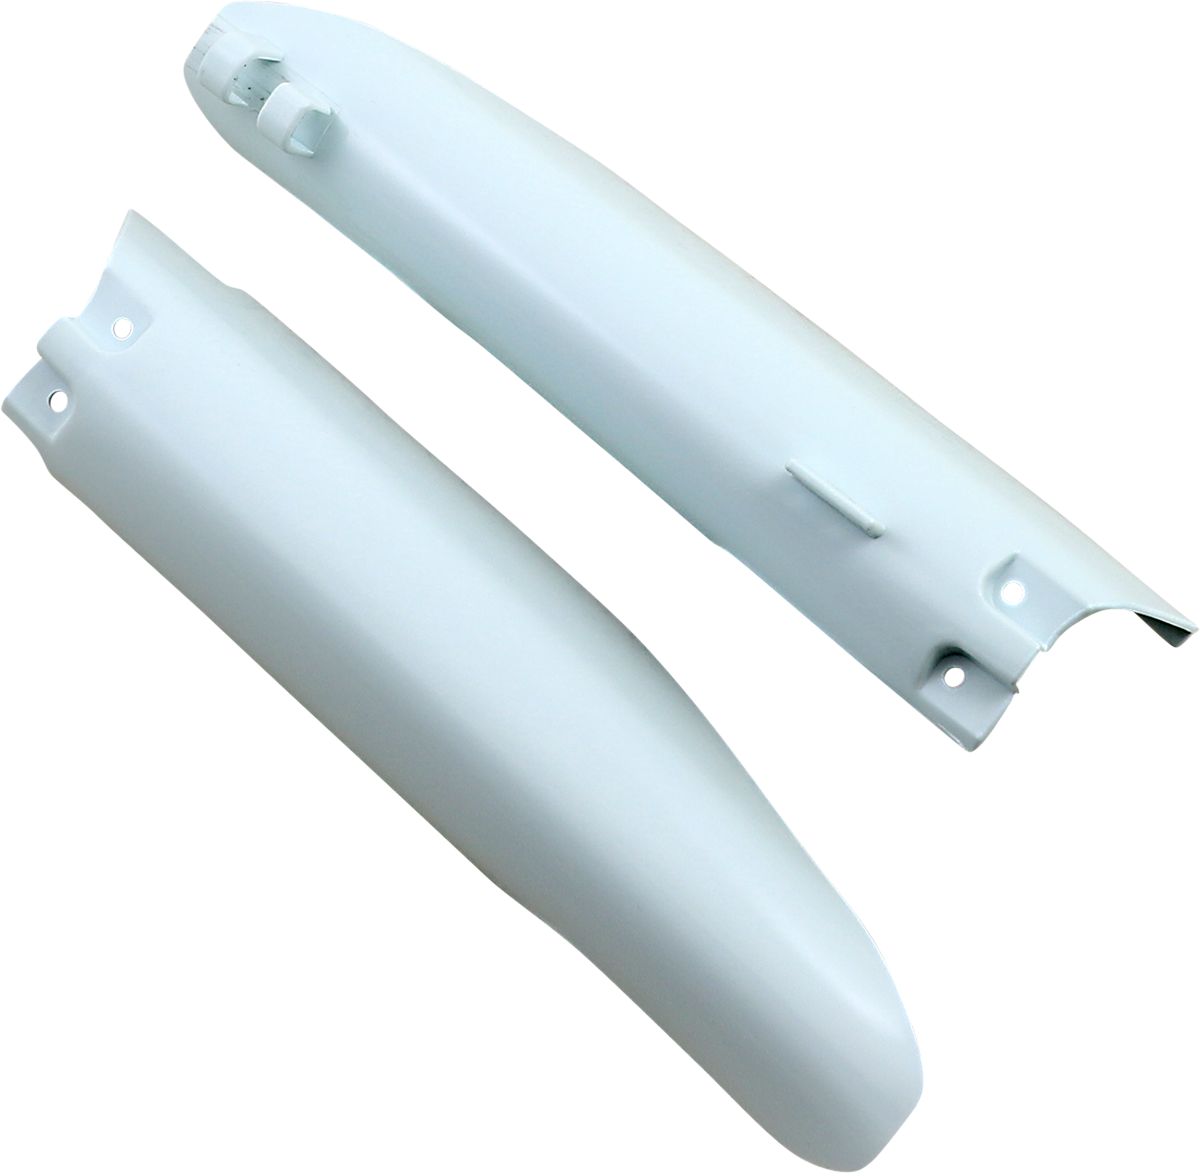 ACERBIS Lower Fork Covers - White 2115020002